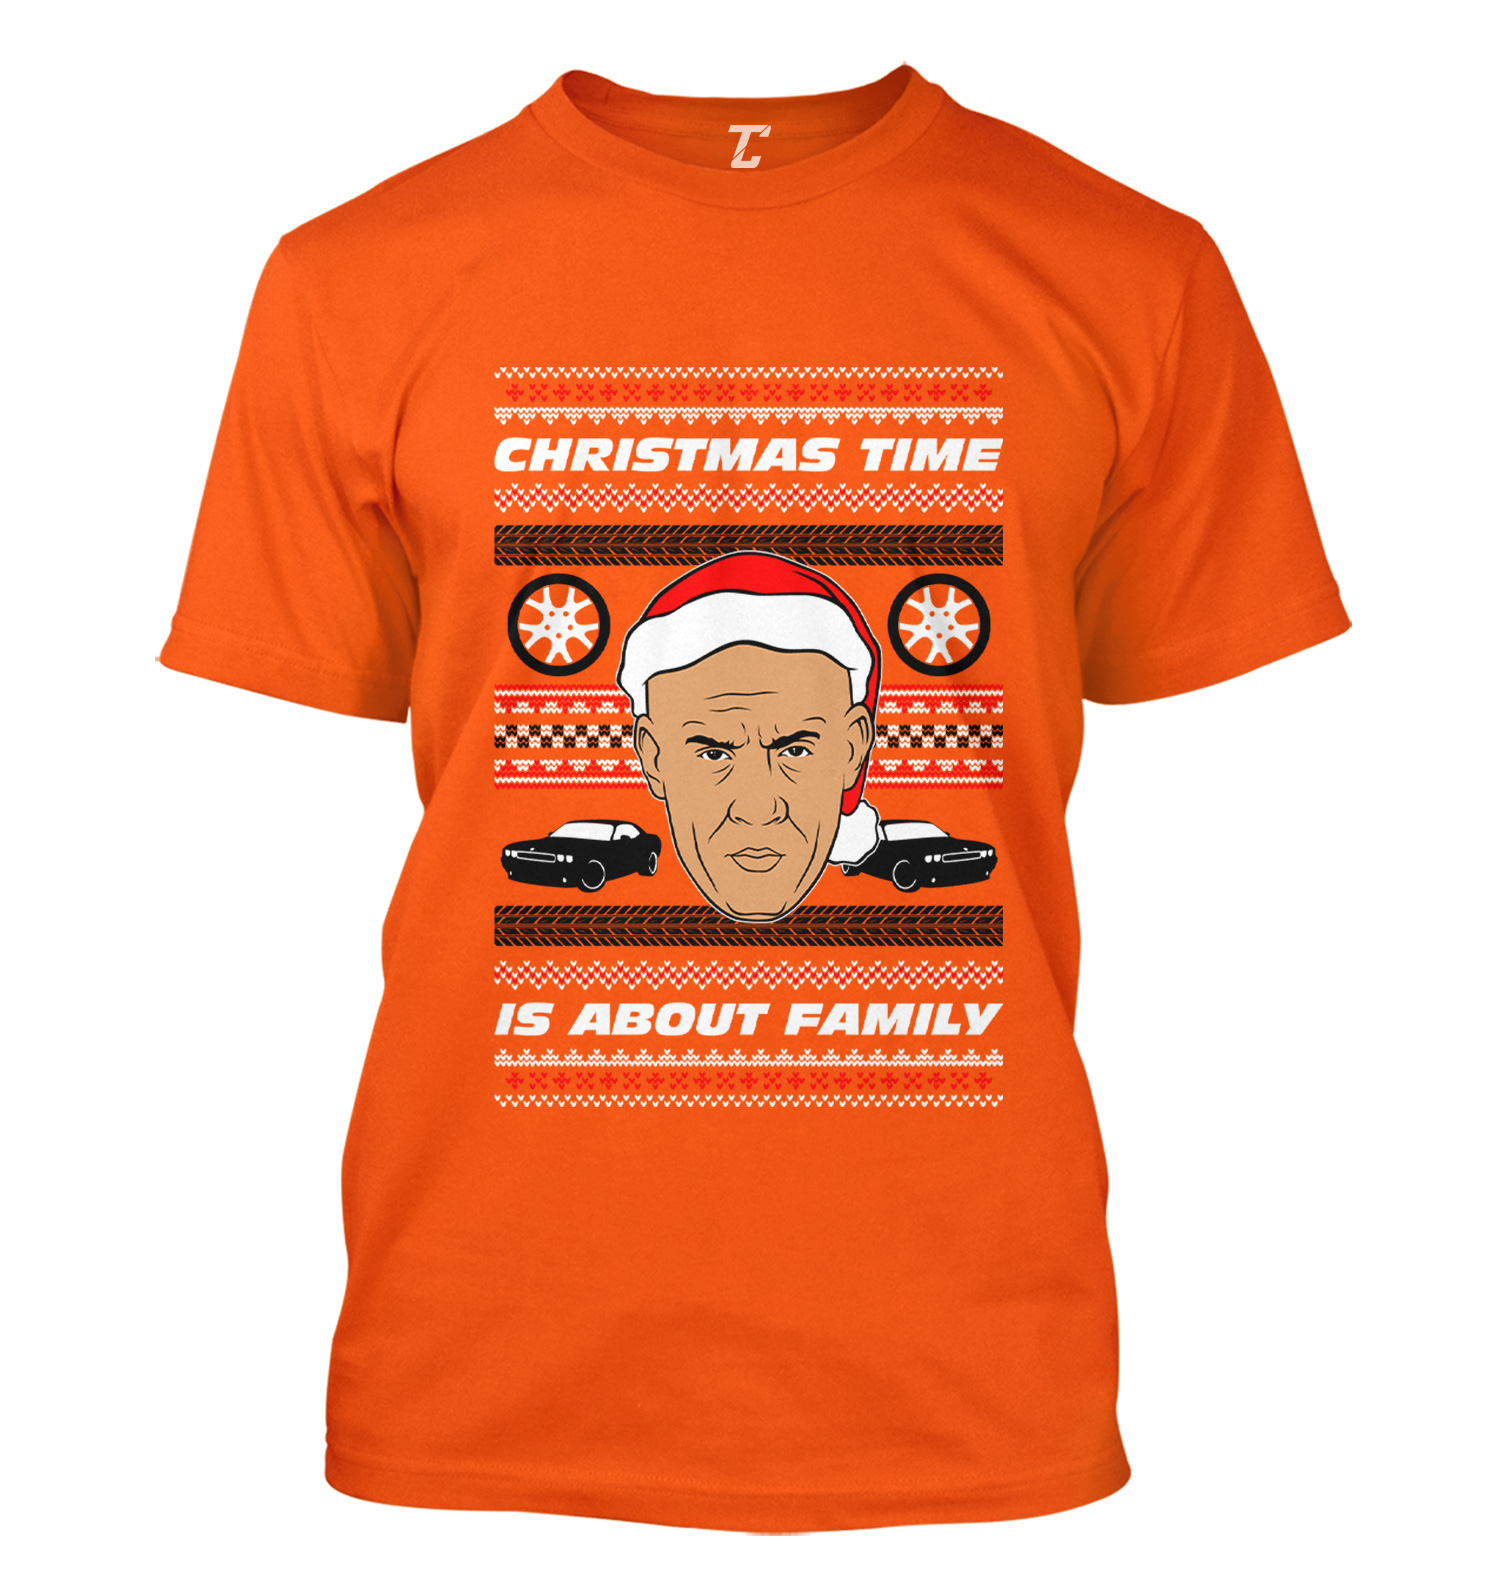 Christmas Time Is About Family - Furious Dom Toretto Men's T-shirt | eBay